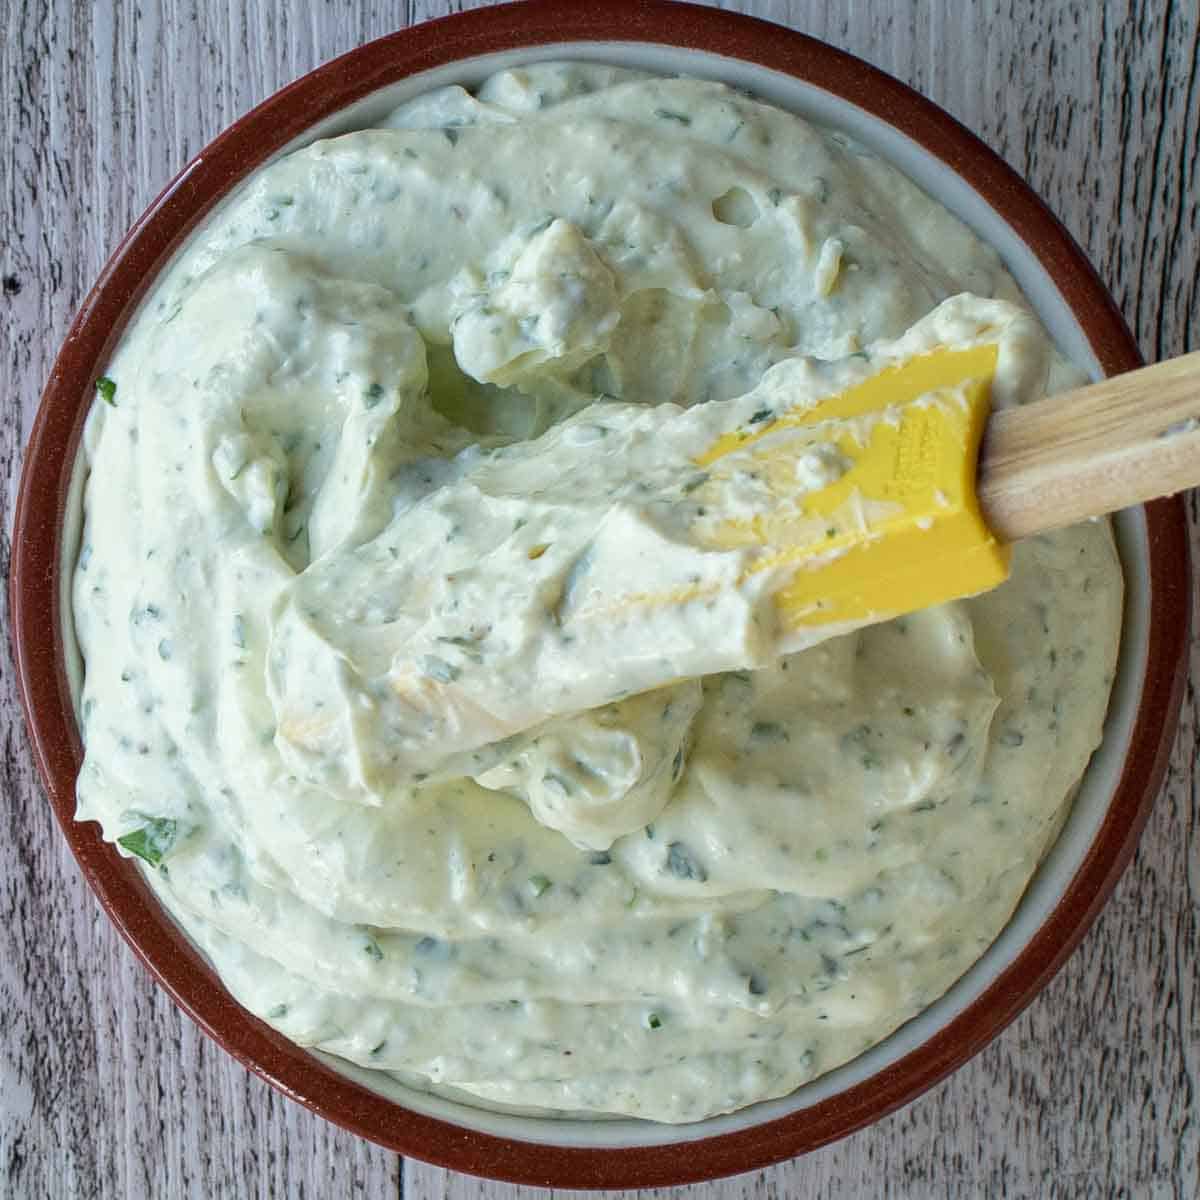 Creamy dip with green flecks in a bowl viewed from above.